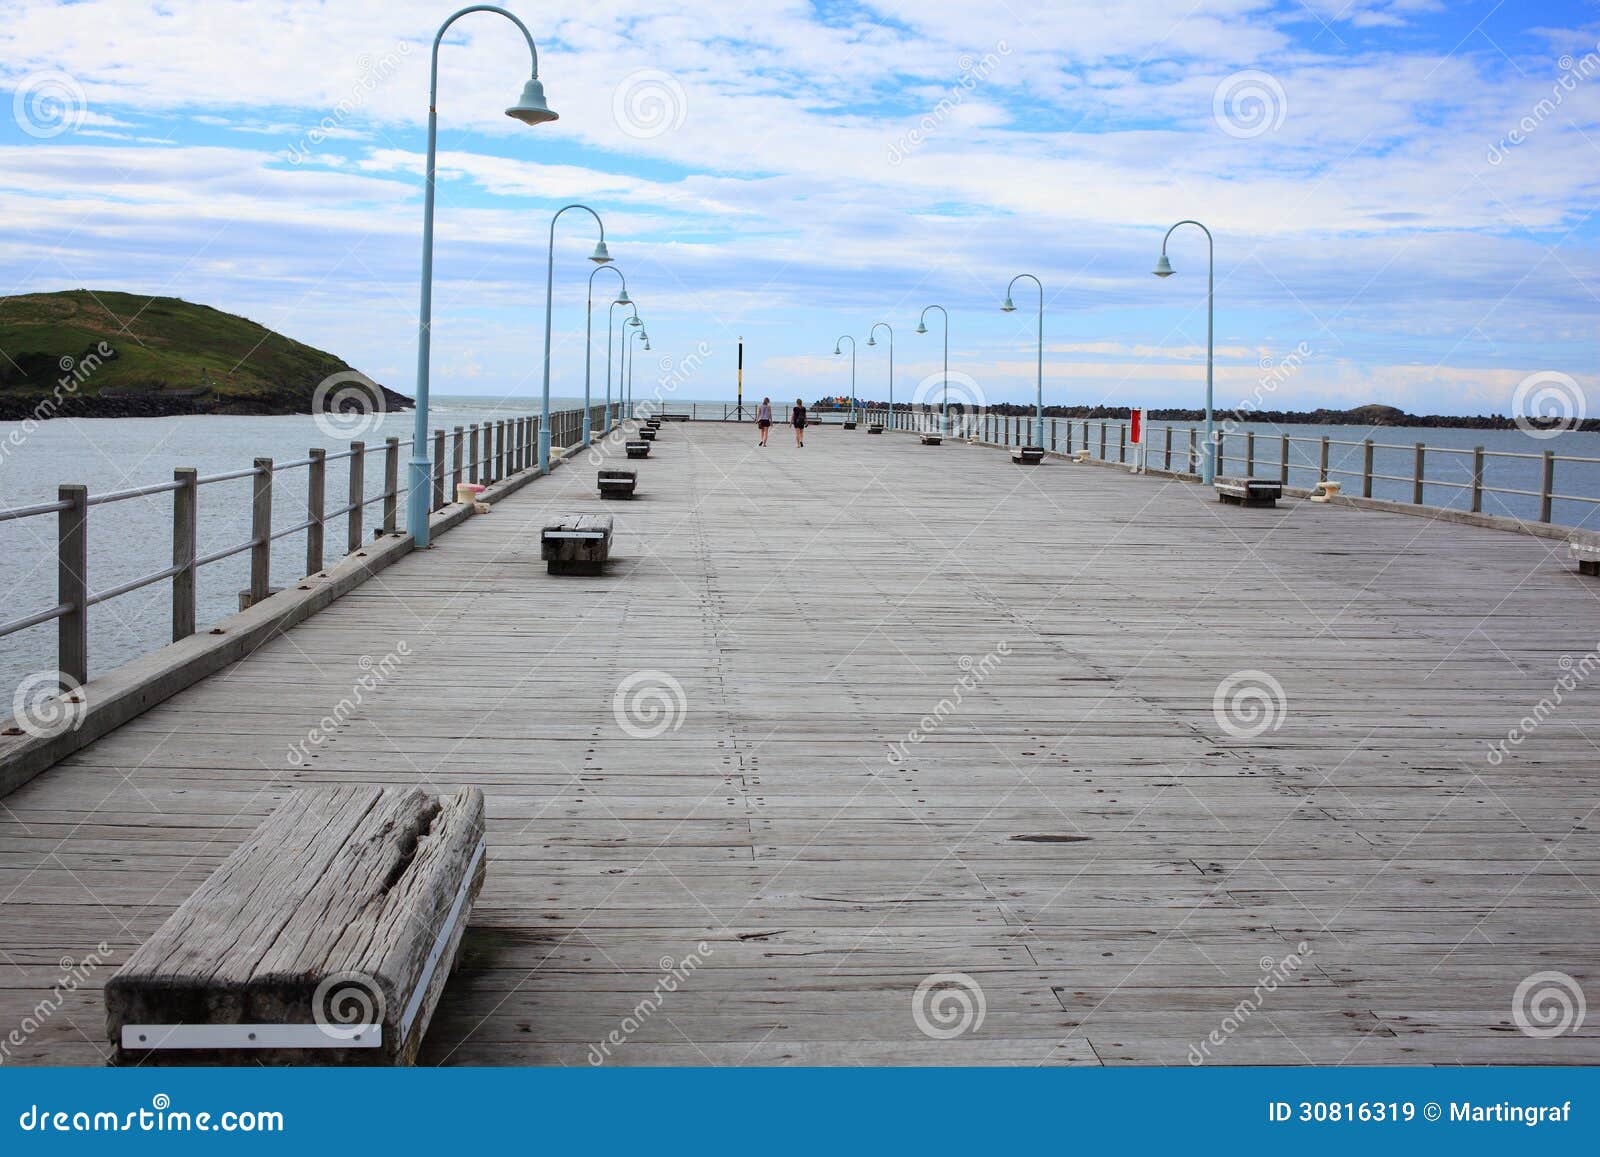 old jetty of coffs harbour